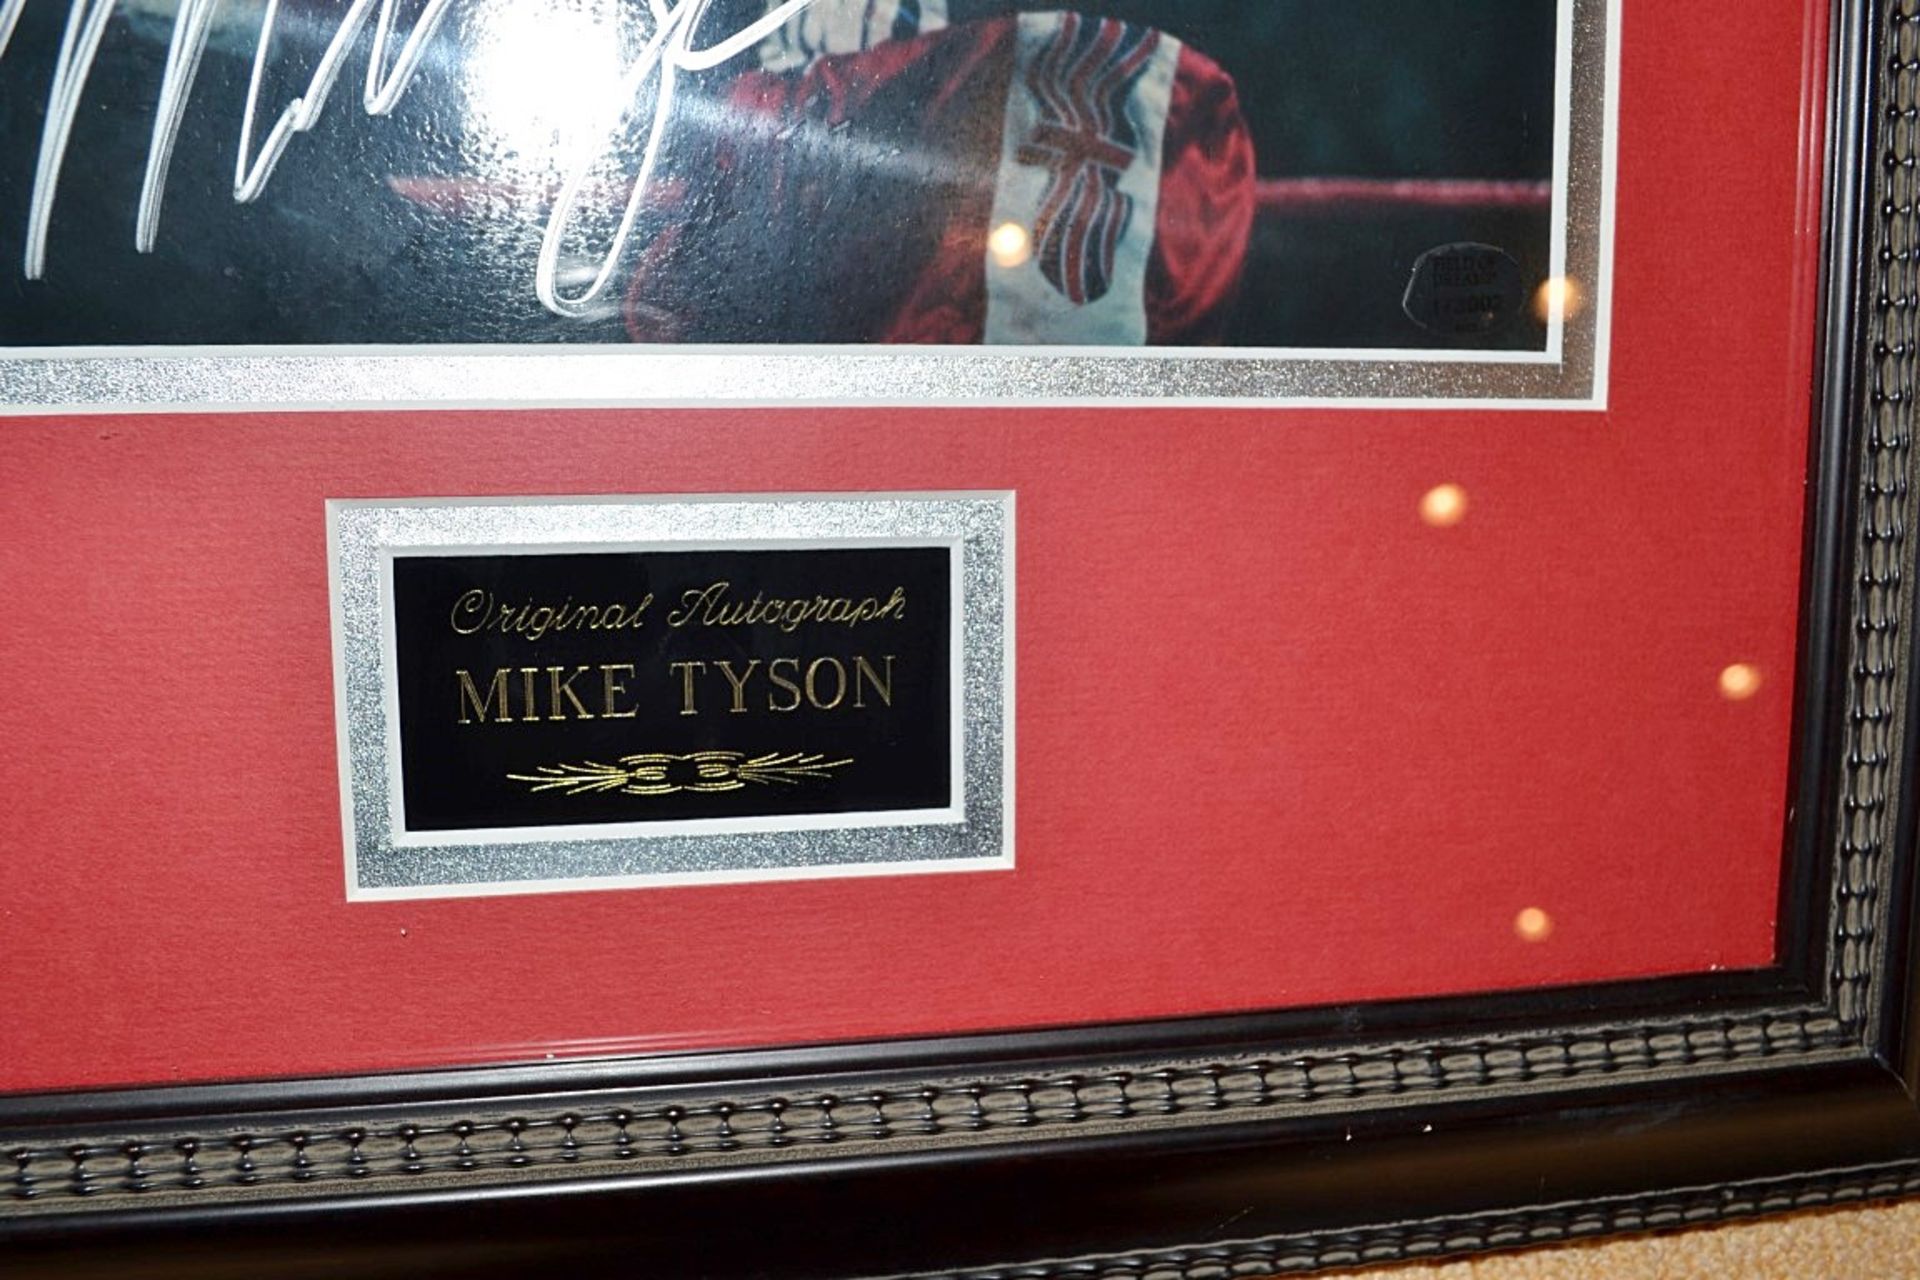 1 x Genuine Framed MIKE TYSON Hand Signed Photo - Guarantee Of Authenticity On Back - Autographed - Image 2 of 4